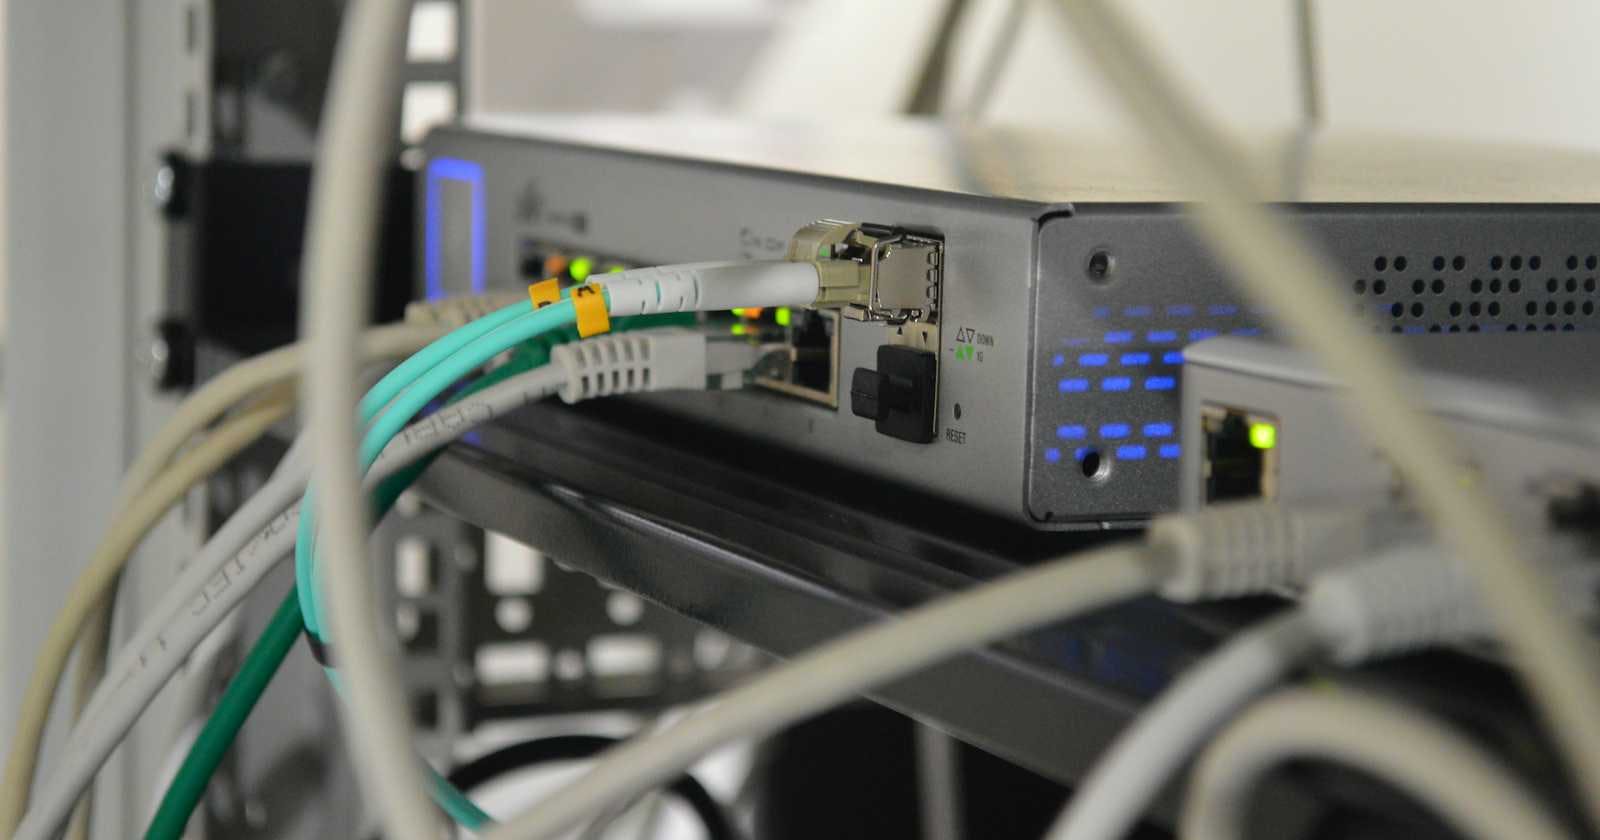 How to configure eBGP on Cisco Routers